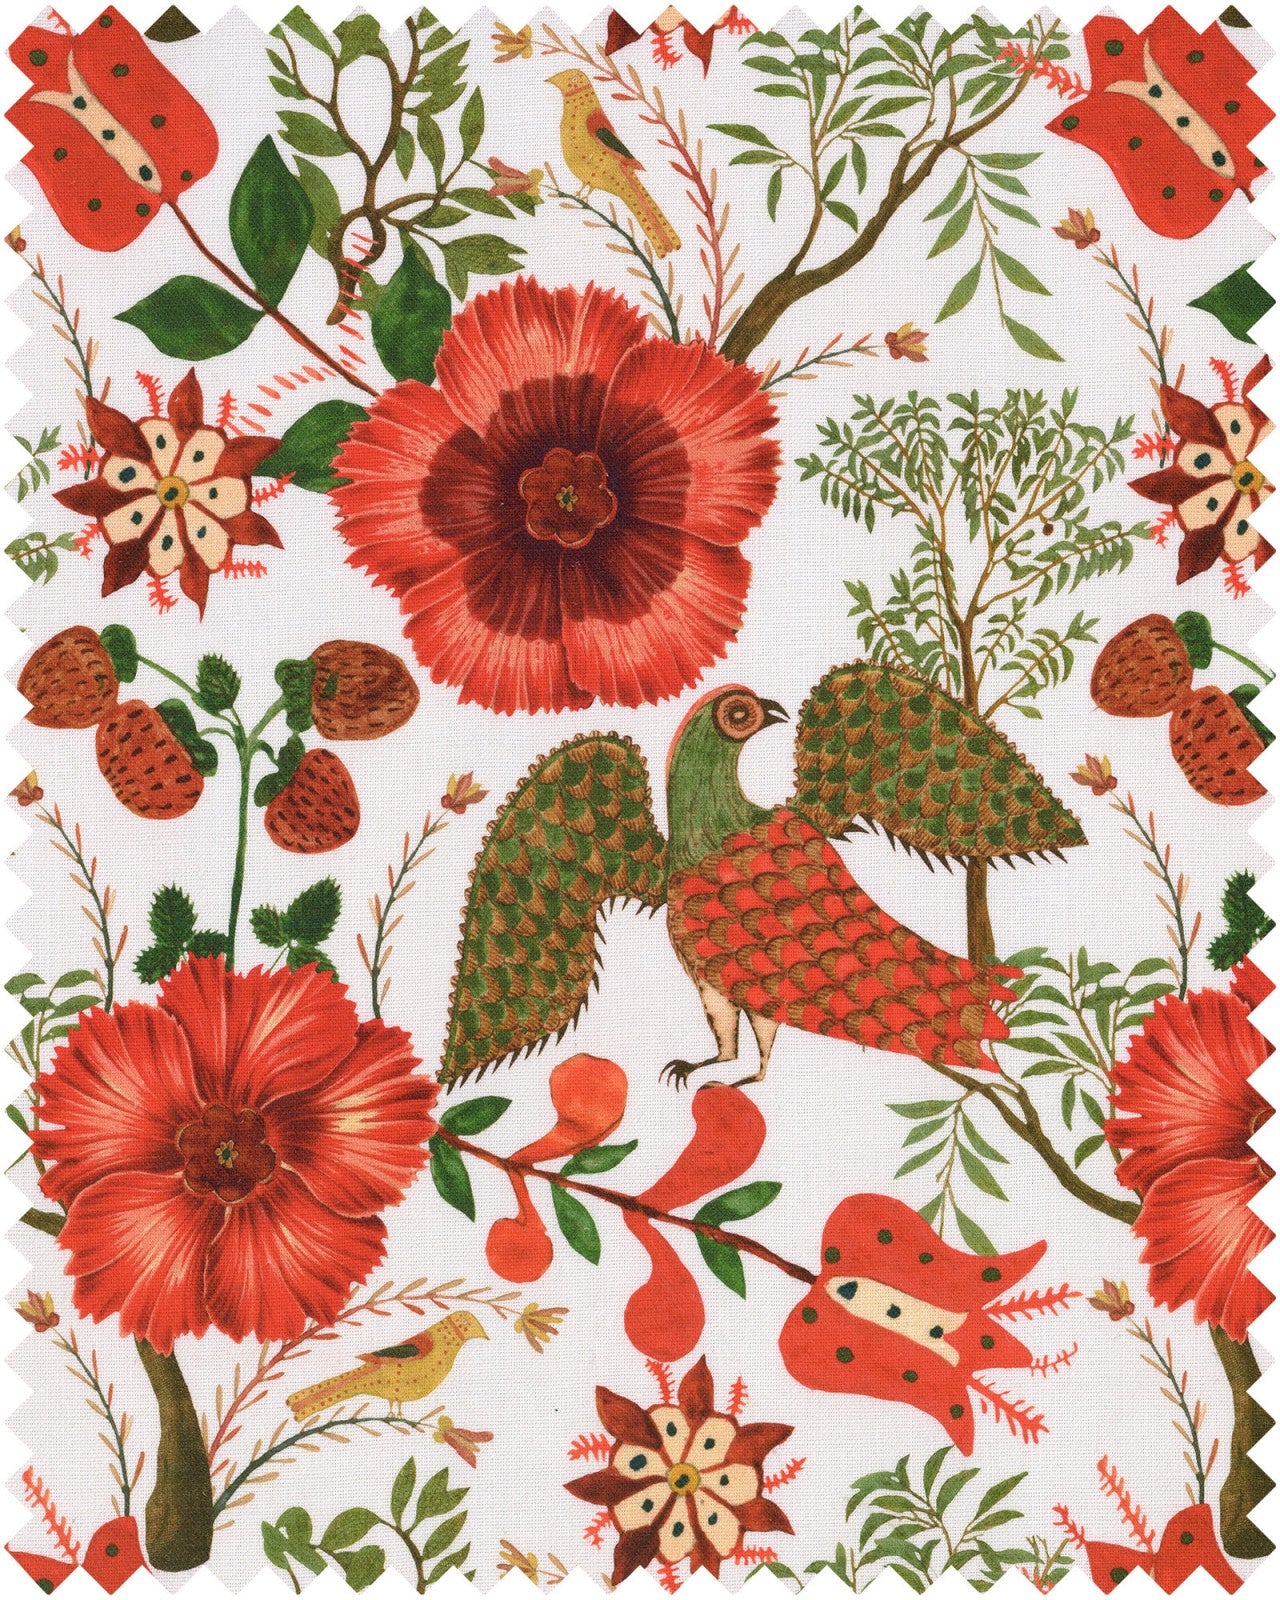 Szekely Folk fabric in red white green color - pattern number FB00040 - by Mind The Gap in the Transylvanian Roots collection